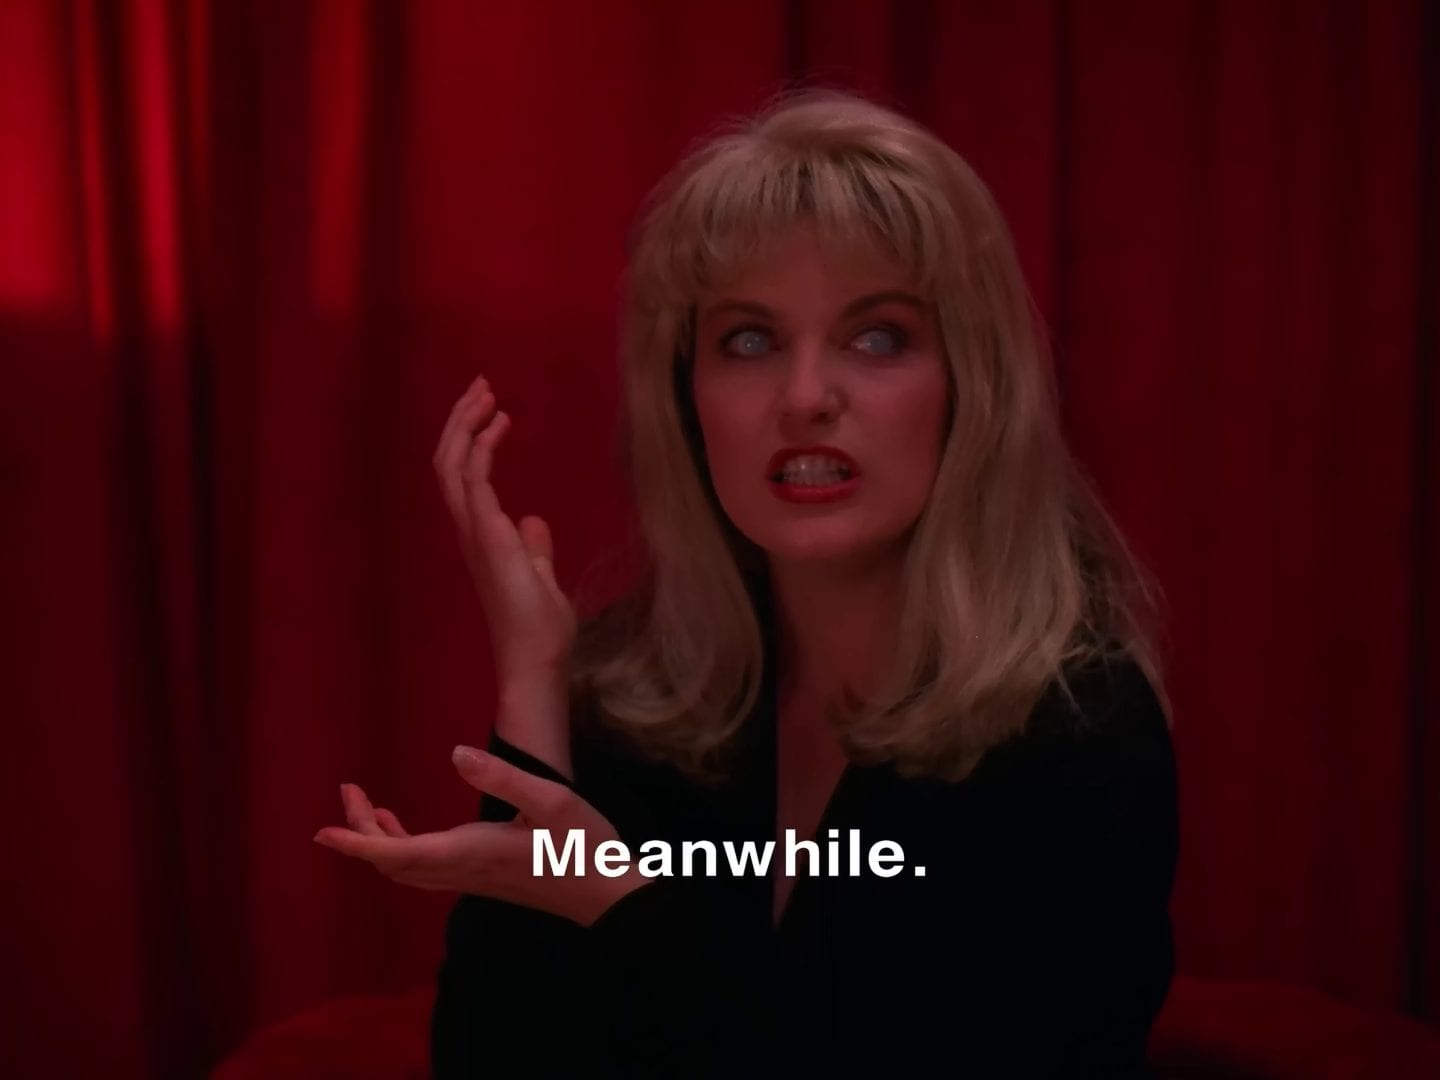 Laura Palmer doppelganger says meanwhile